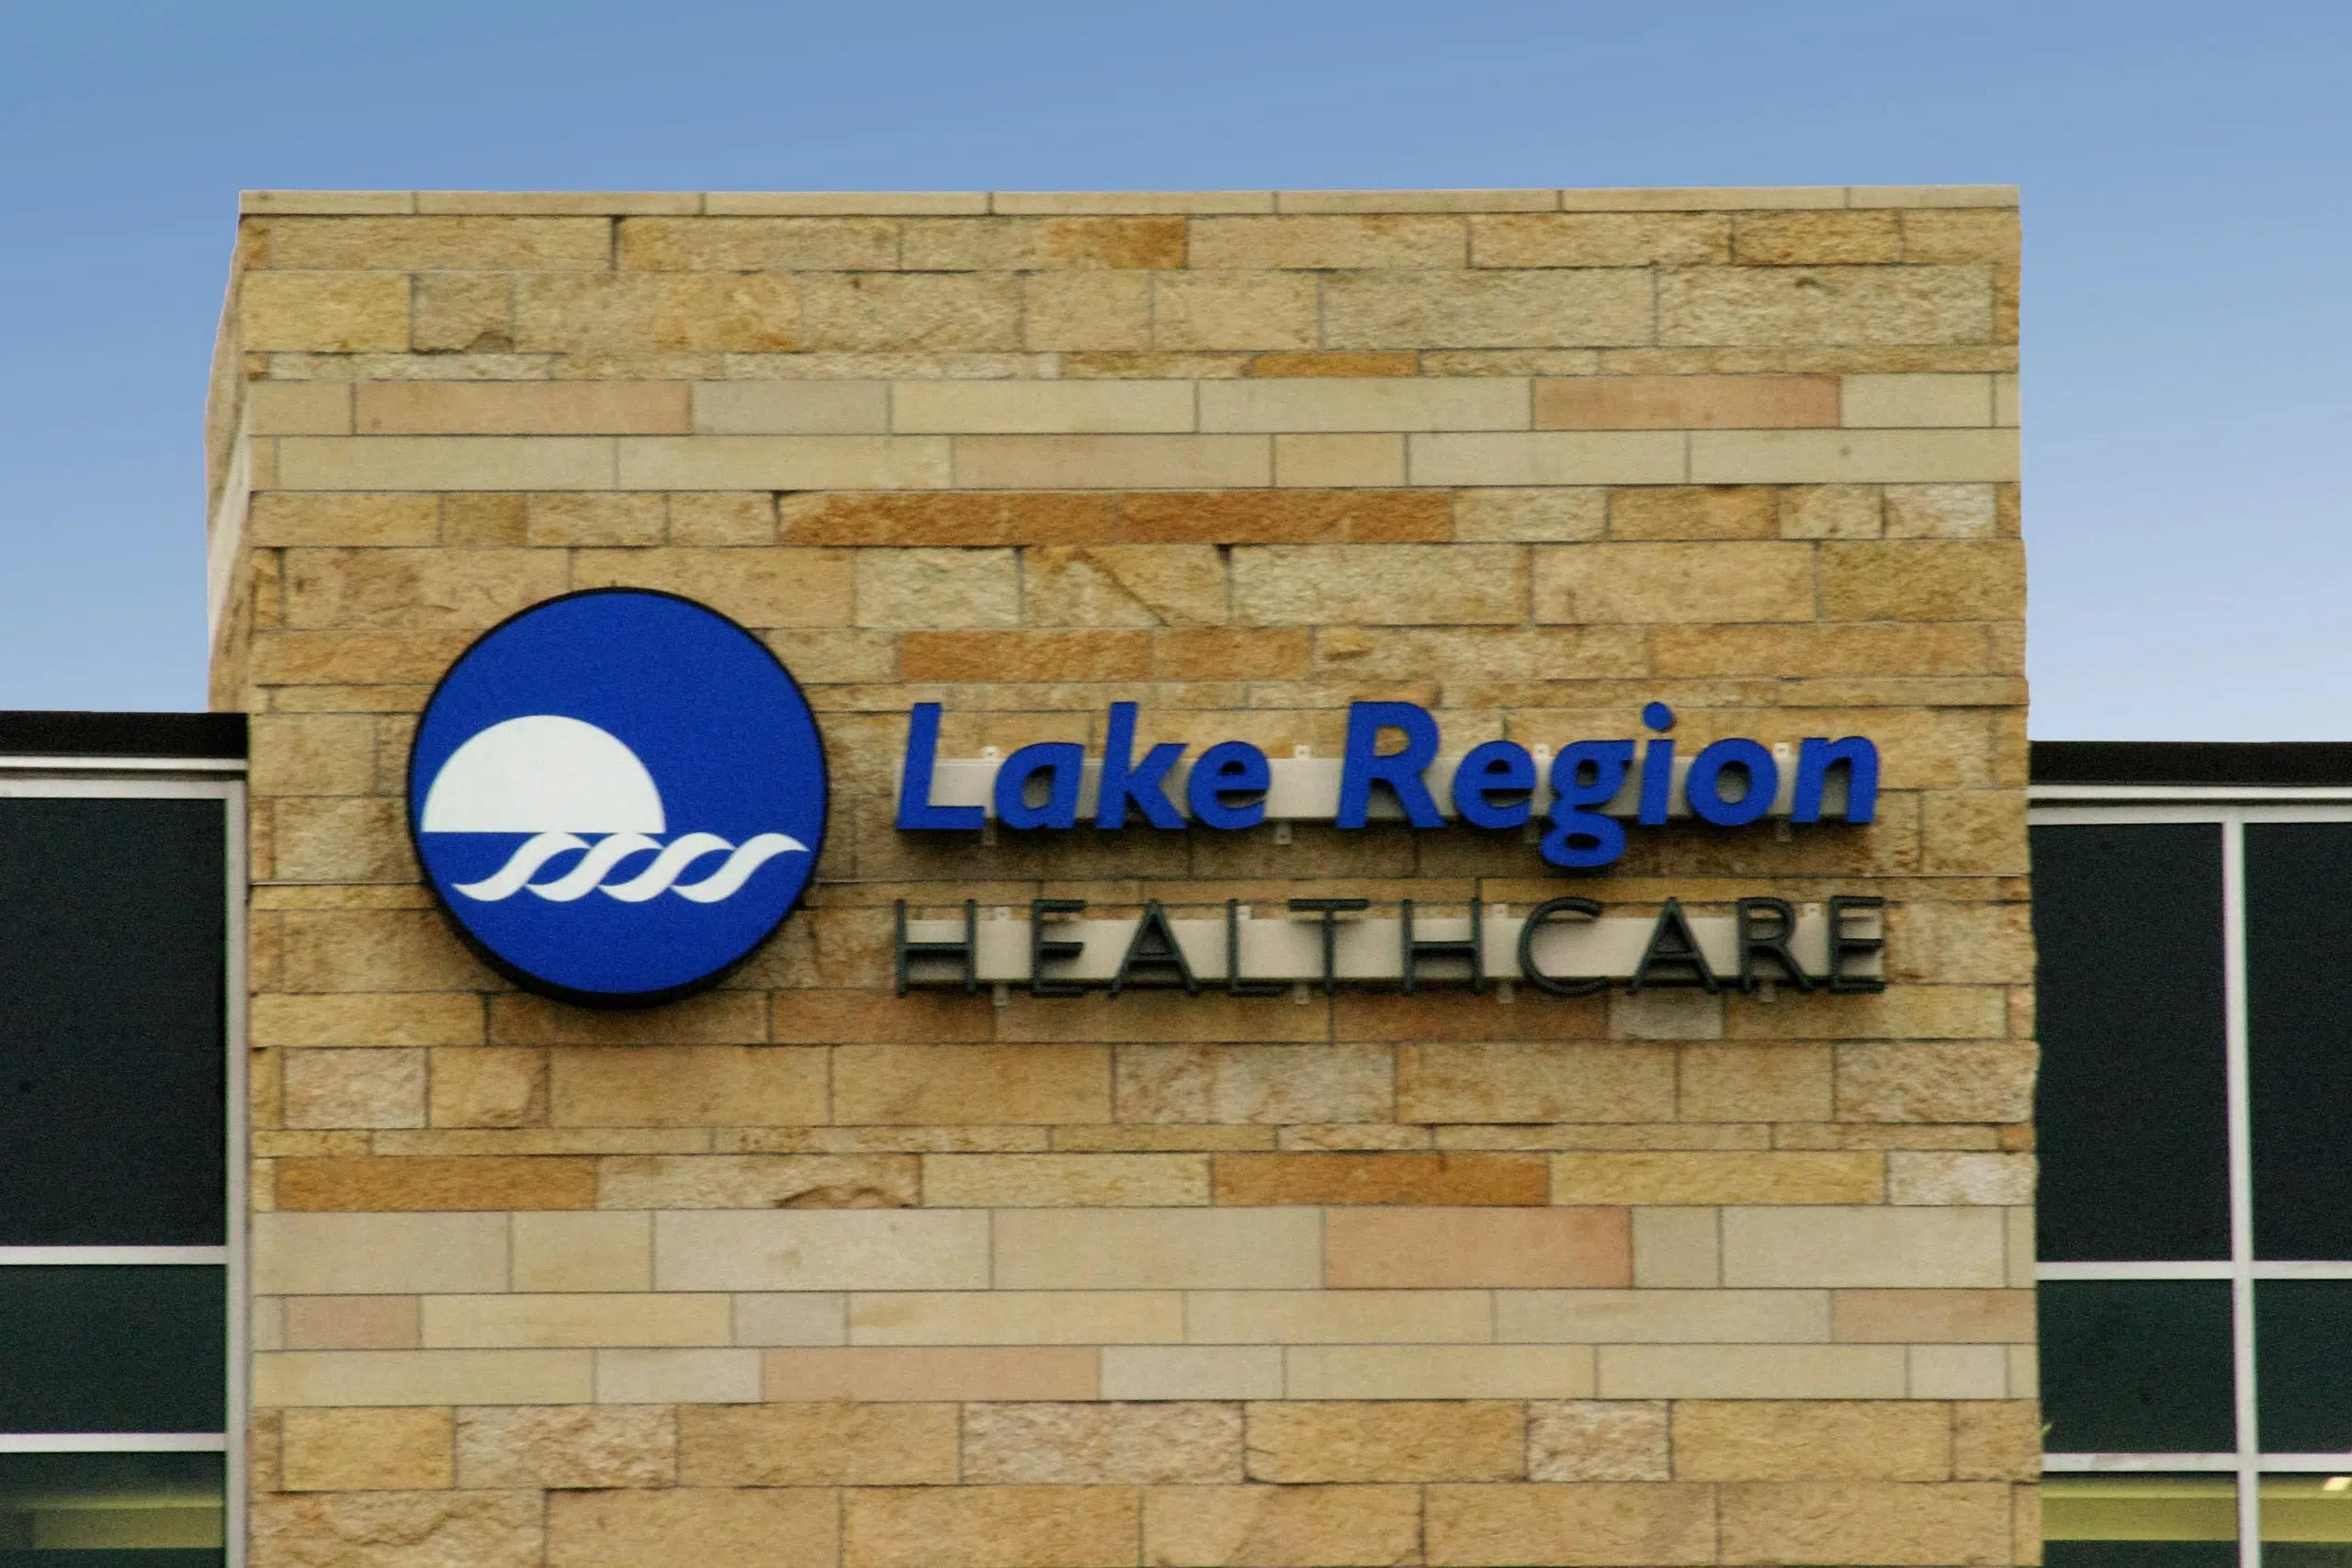 Lake Region Healthcare Welcomes Dr. Carlson, Adds Chiropractic Services